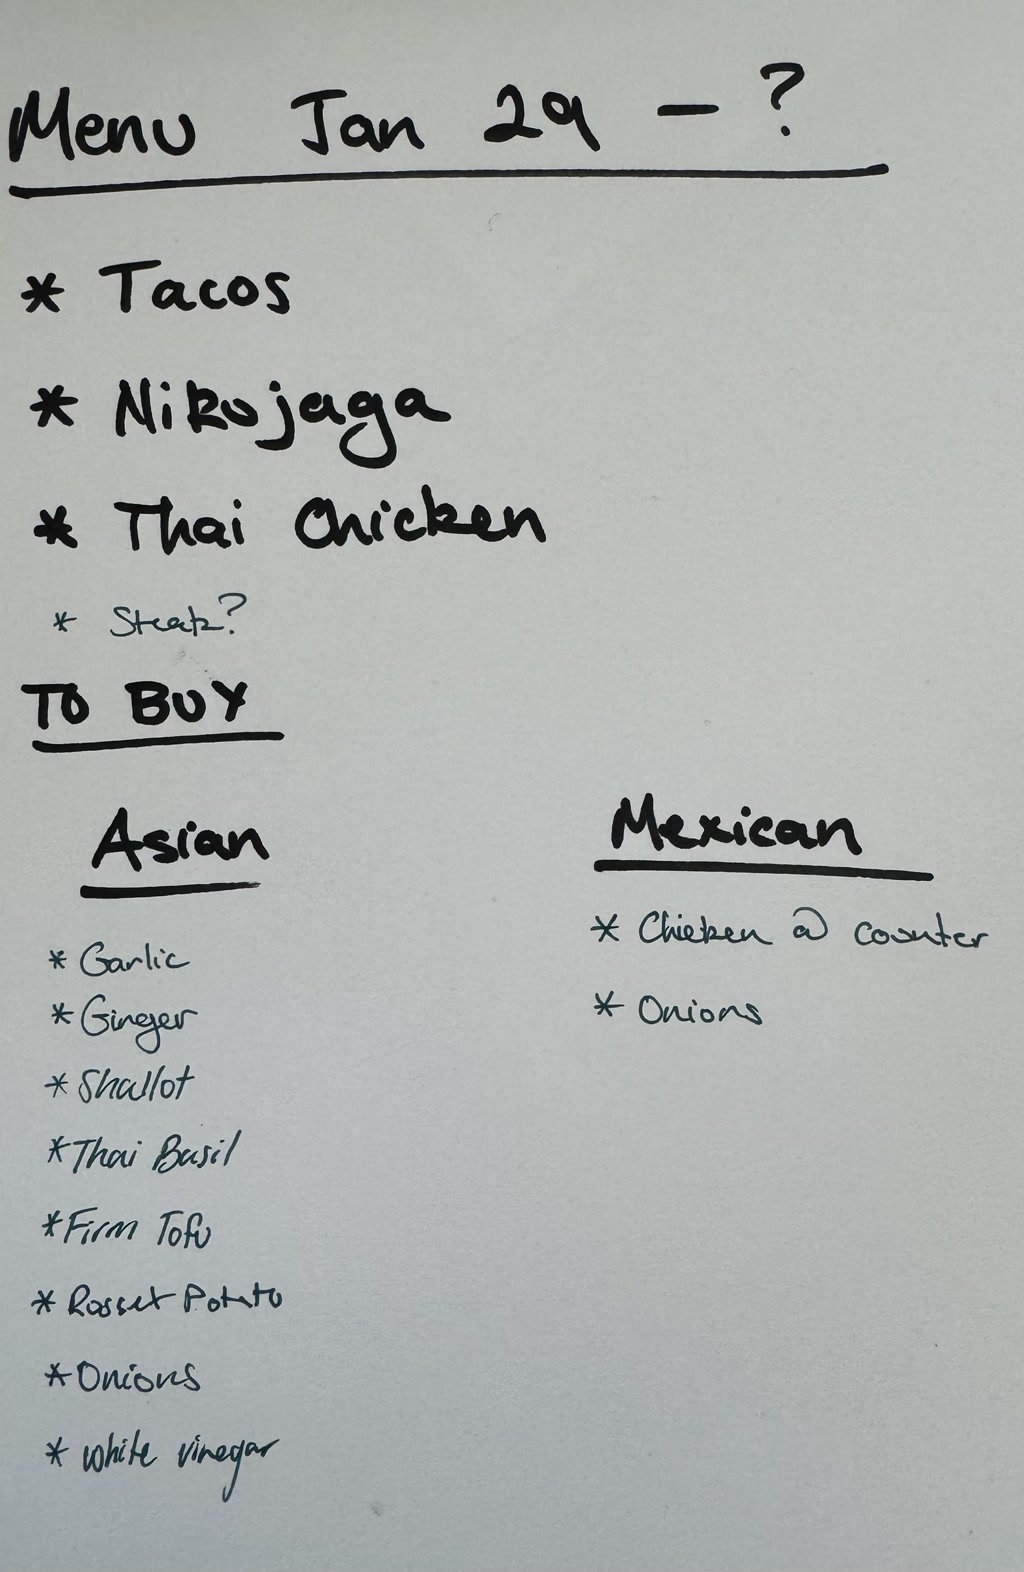 The content appears to be a handwritten plan, possibly for a weekly menu and grocery shopping list, segmented into different cuisine categories and itemized ingredients. The menu items listed are a variety of meals, including one that is uncertain and is followed by a question mark. The shopping list is divided into two sections by cuisine: Asian and Mexican, each with ingredients that are likely intended for the preparation of the meals listed in the menu plan.